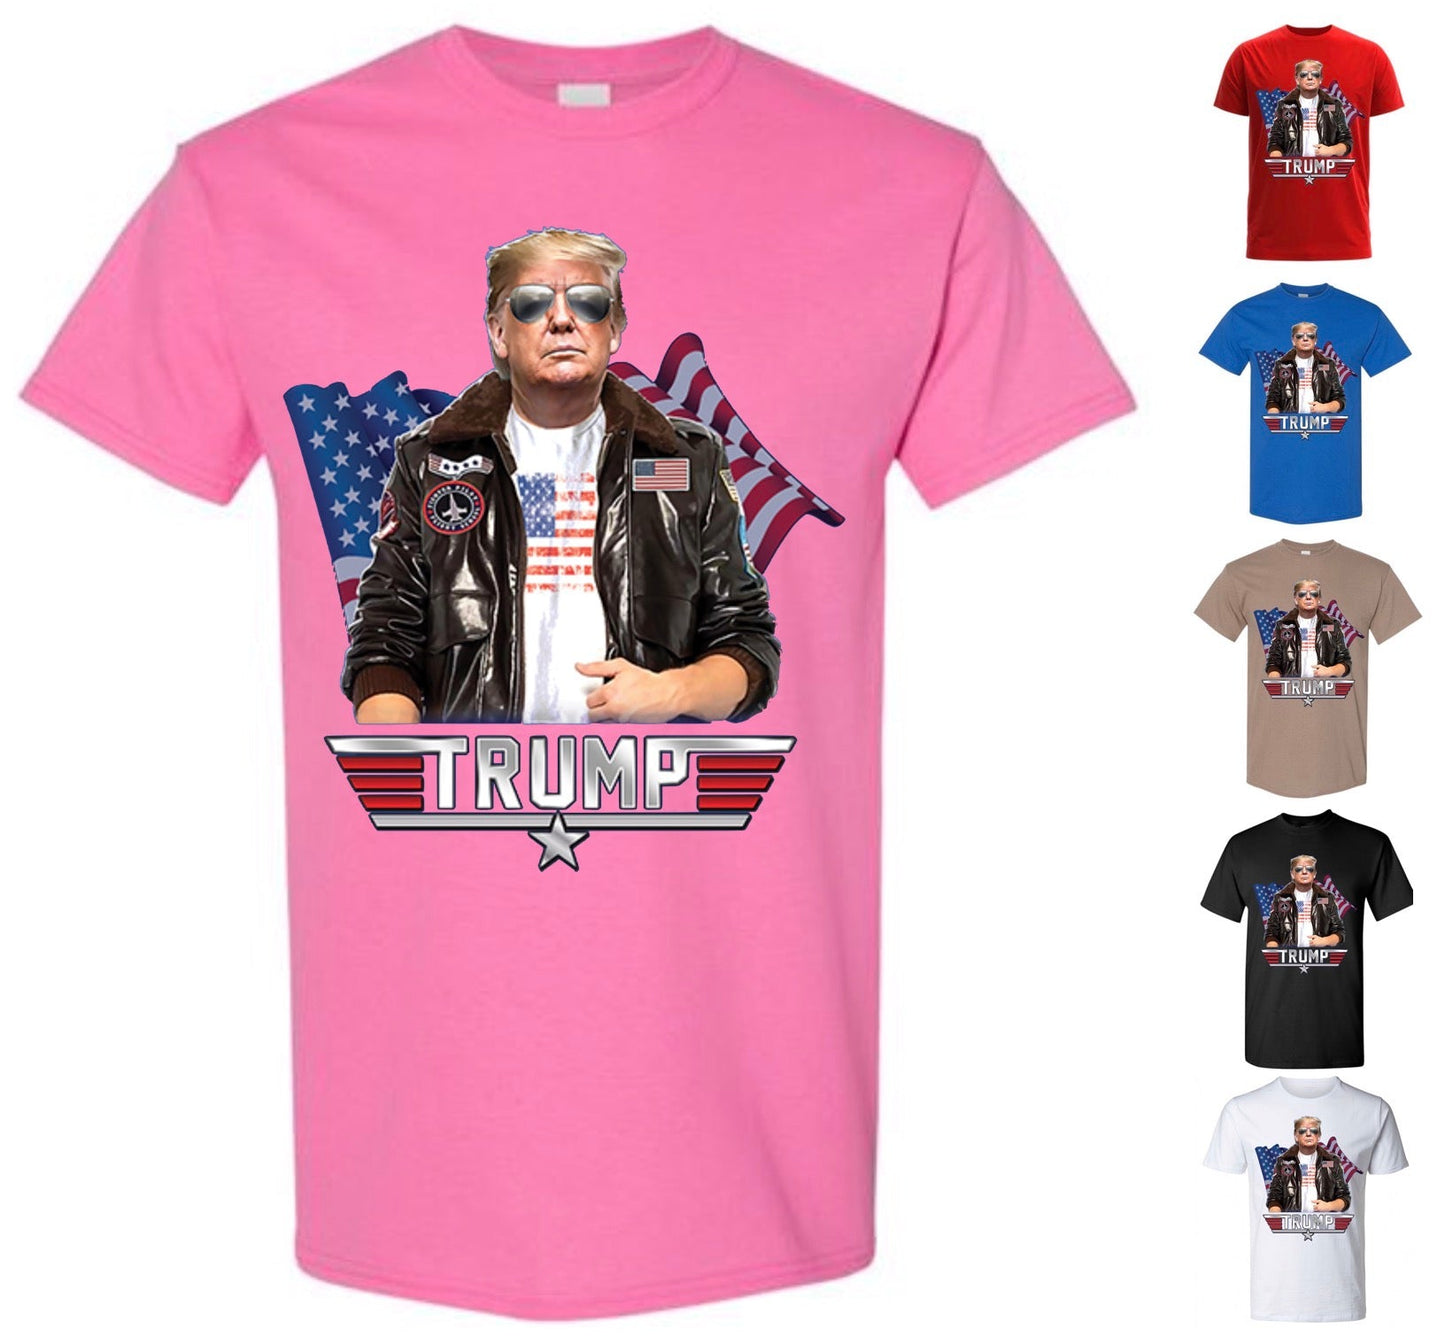 Top Gun Trump — 4th of July Special (FREE Shipping)